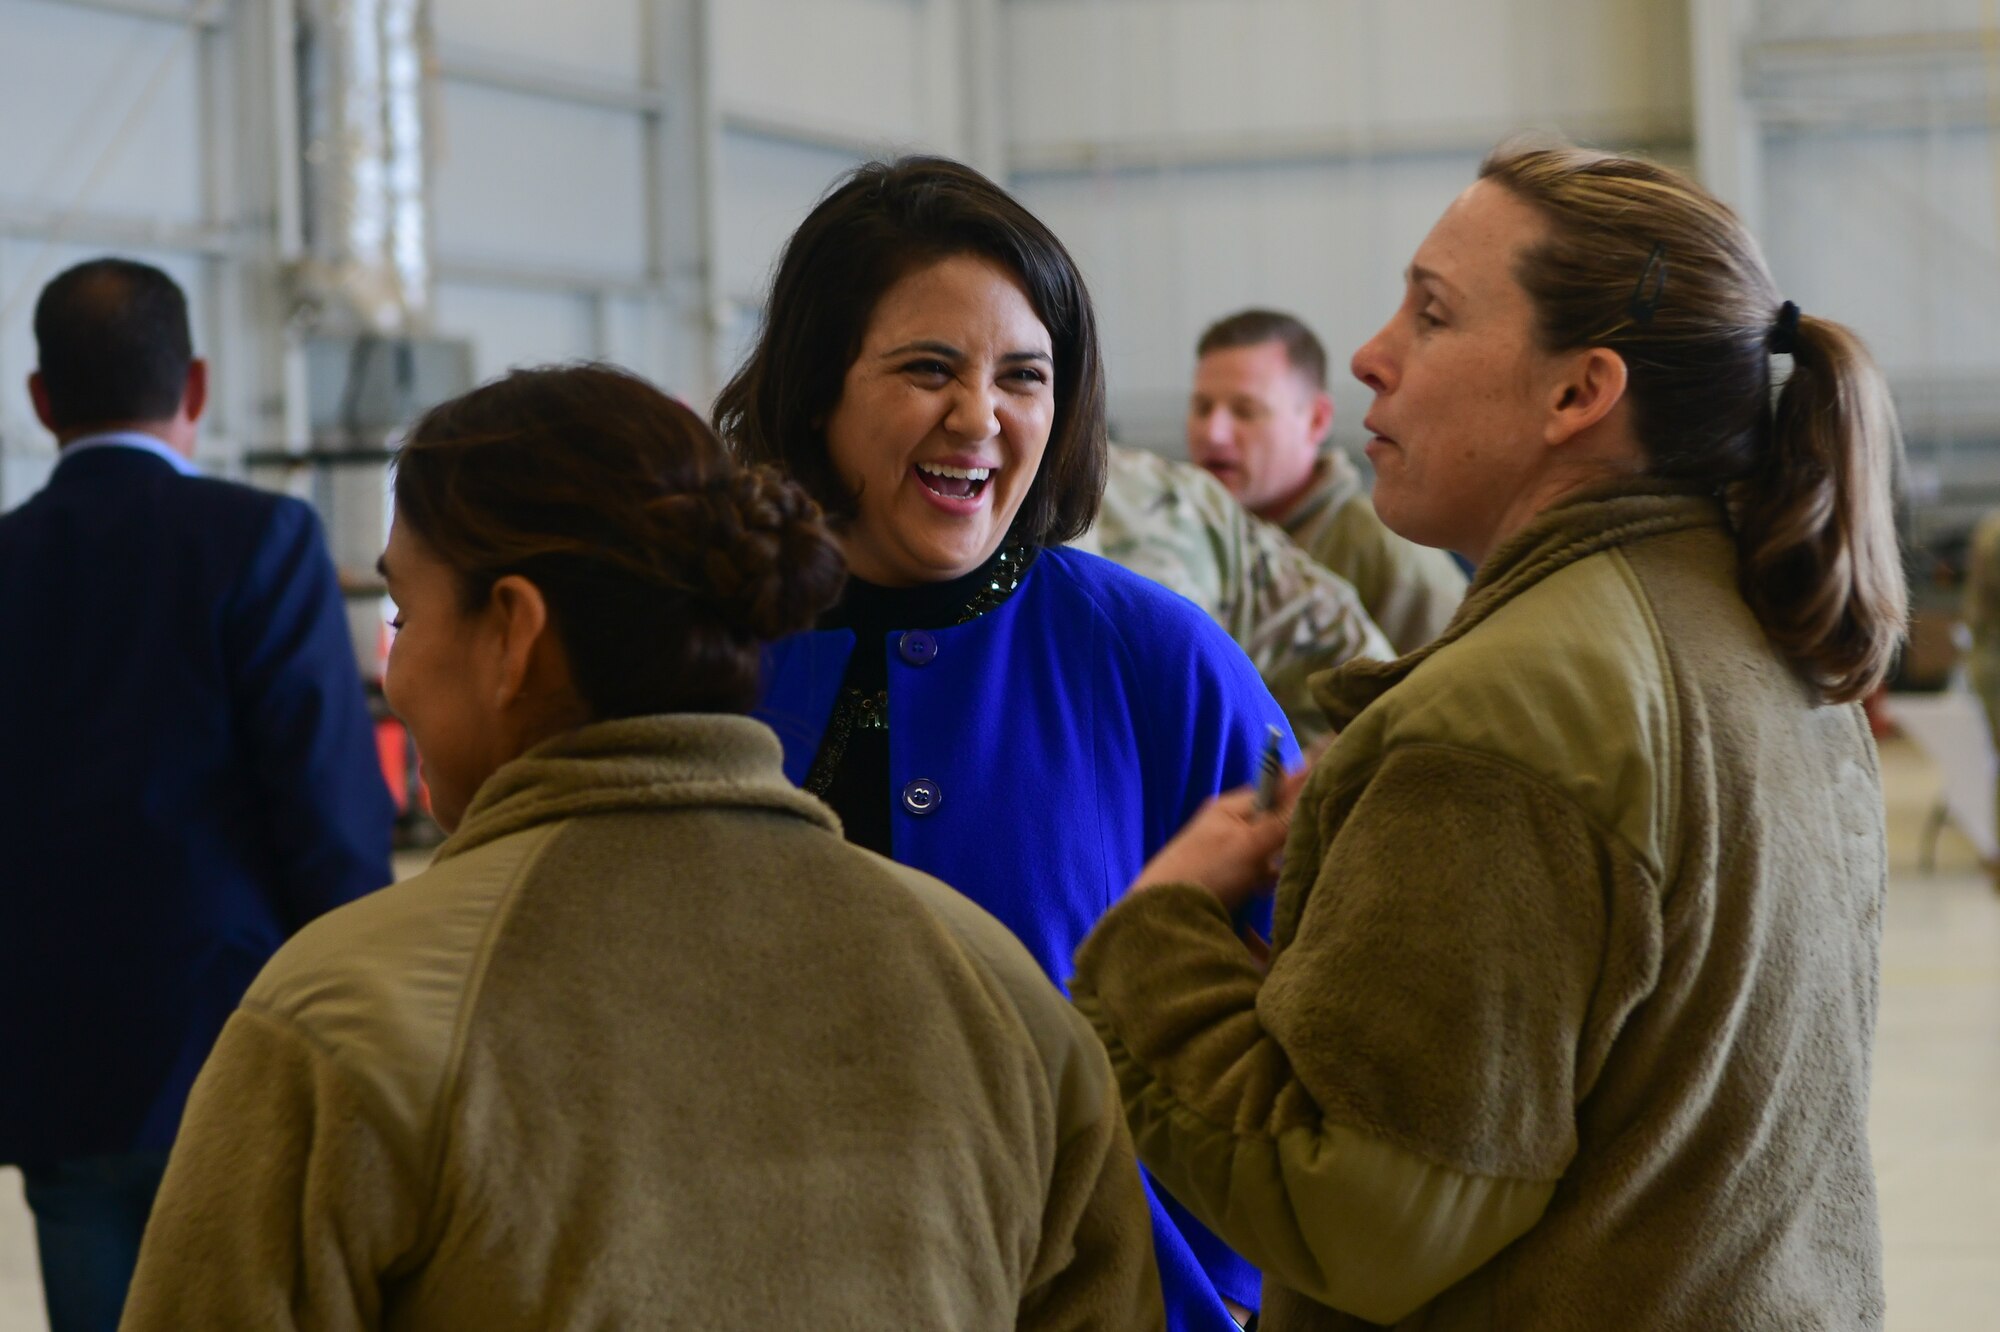 Sami Nall, 9th Operations Group honorary commander and Department of Water Resources engineer, speaks with U.S. Air Force Lt. Col. Alisha Earls, 9th Physiological Support Squadron commander, at the honorary commander immersion tour near the flight line at Beale Air Force Base, Calif., Feb. 24, 2023.